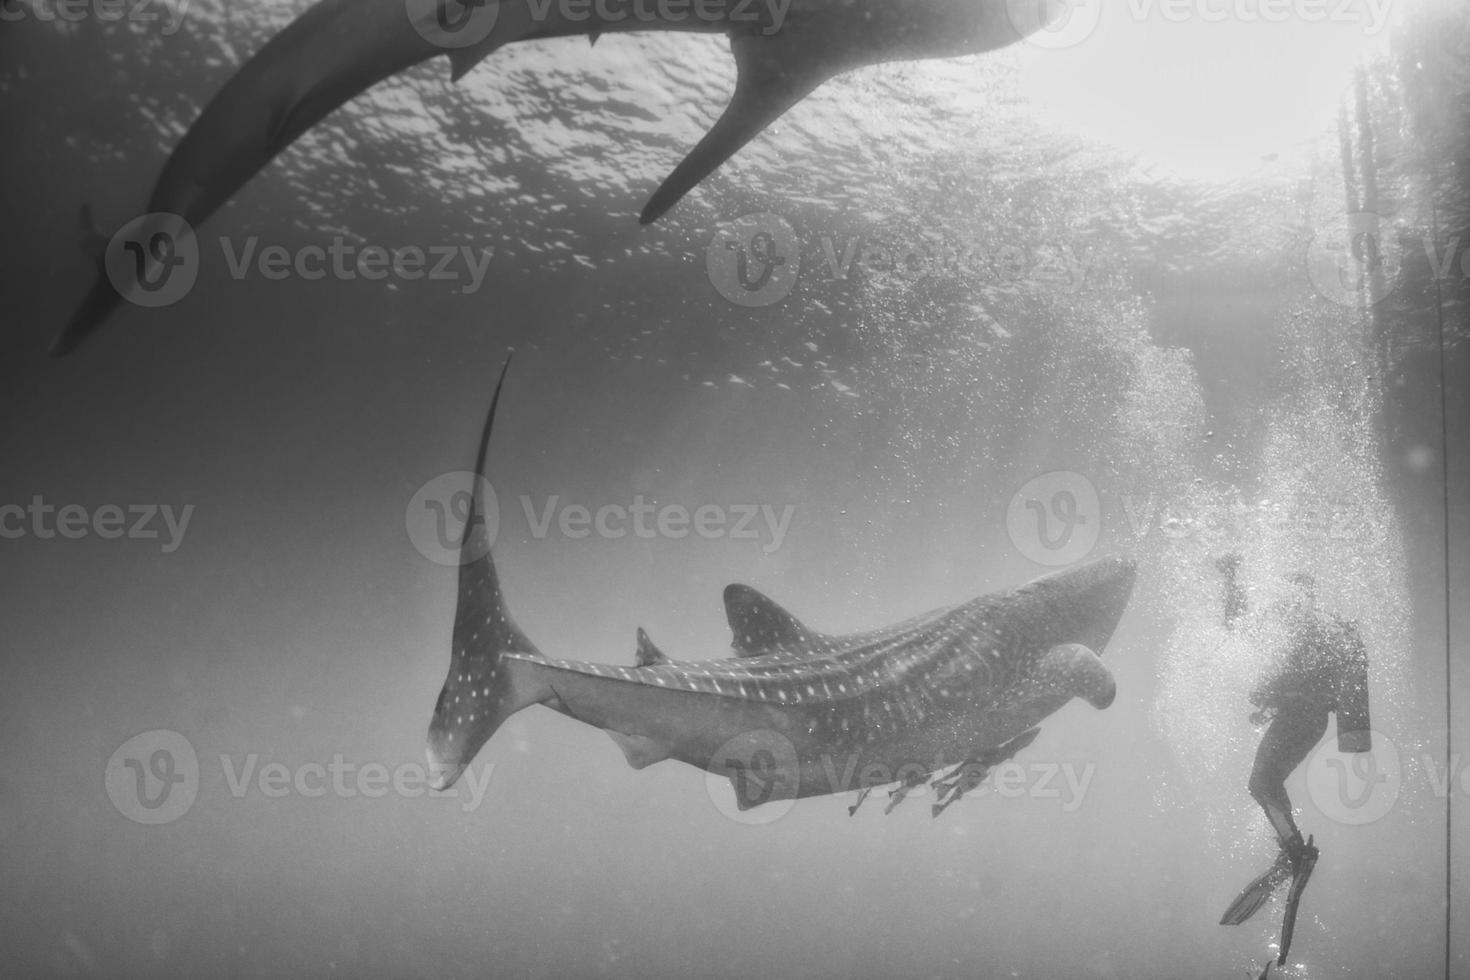 Whale Shark close encounter with diver underwater in Papua photo